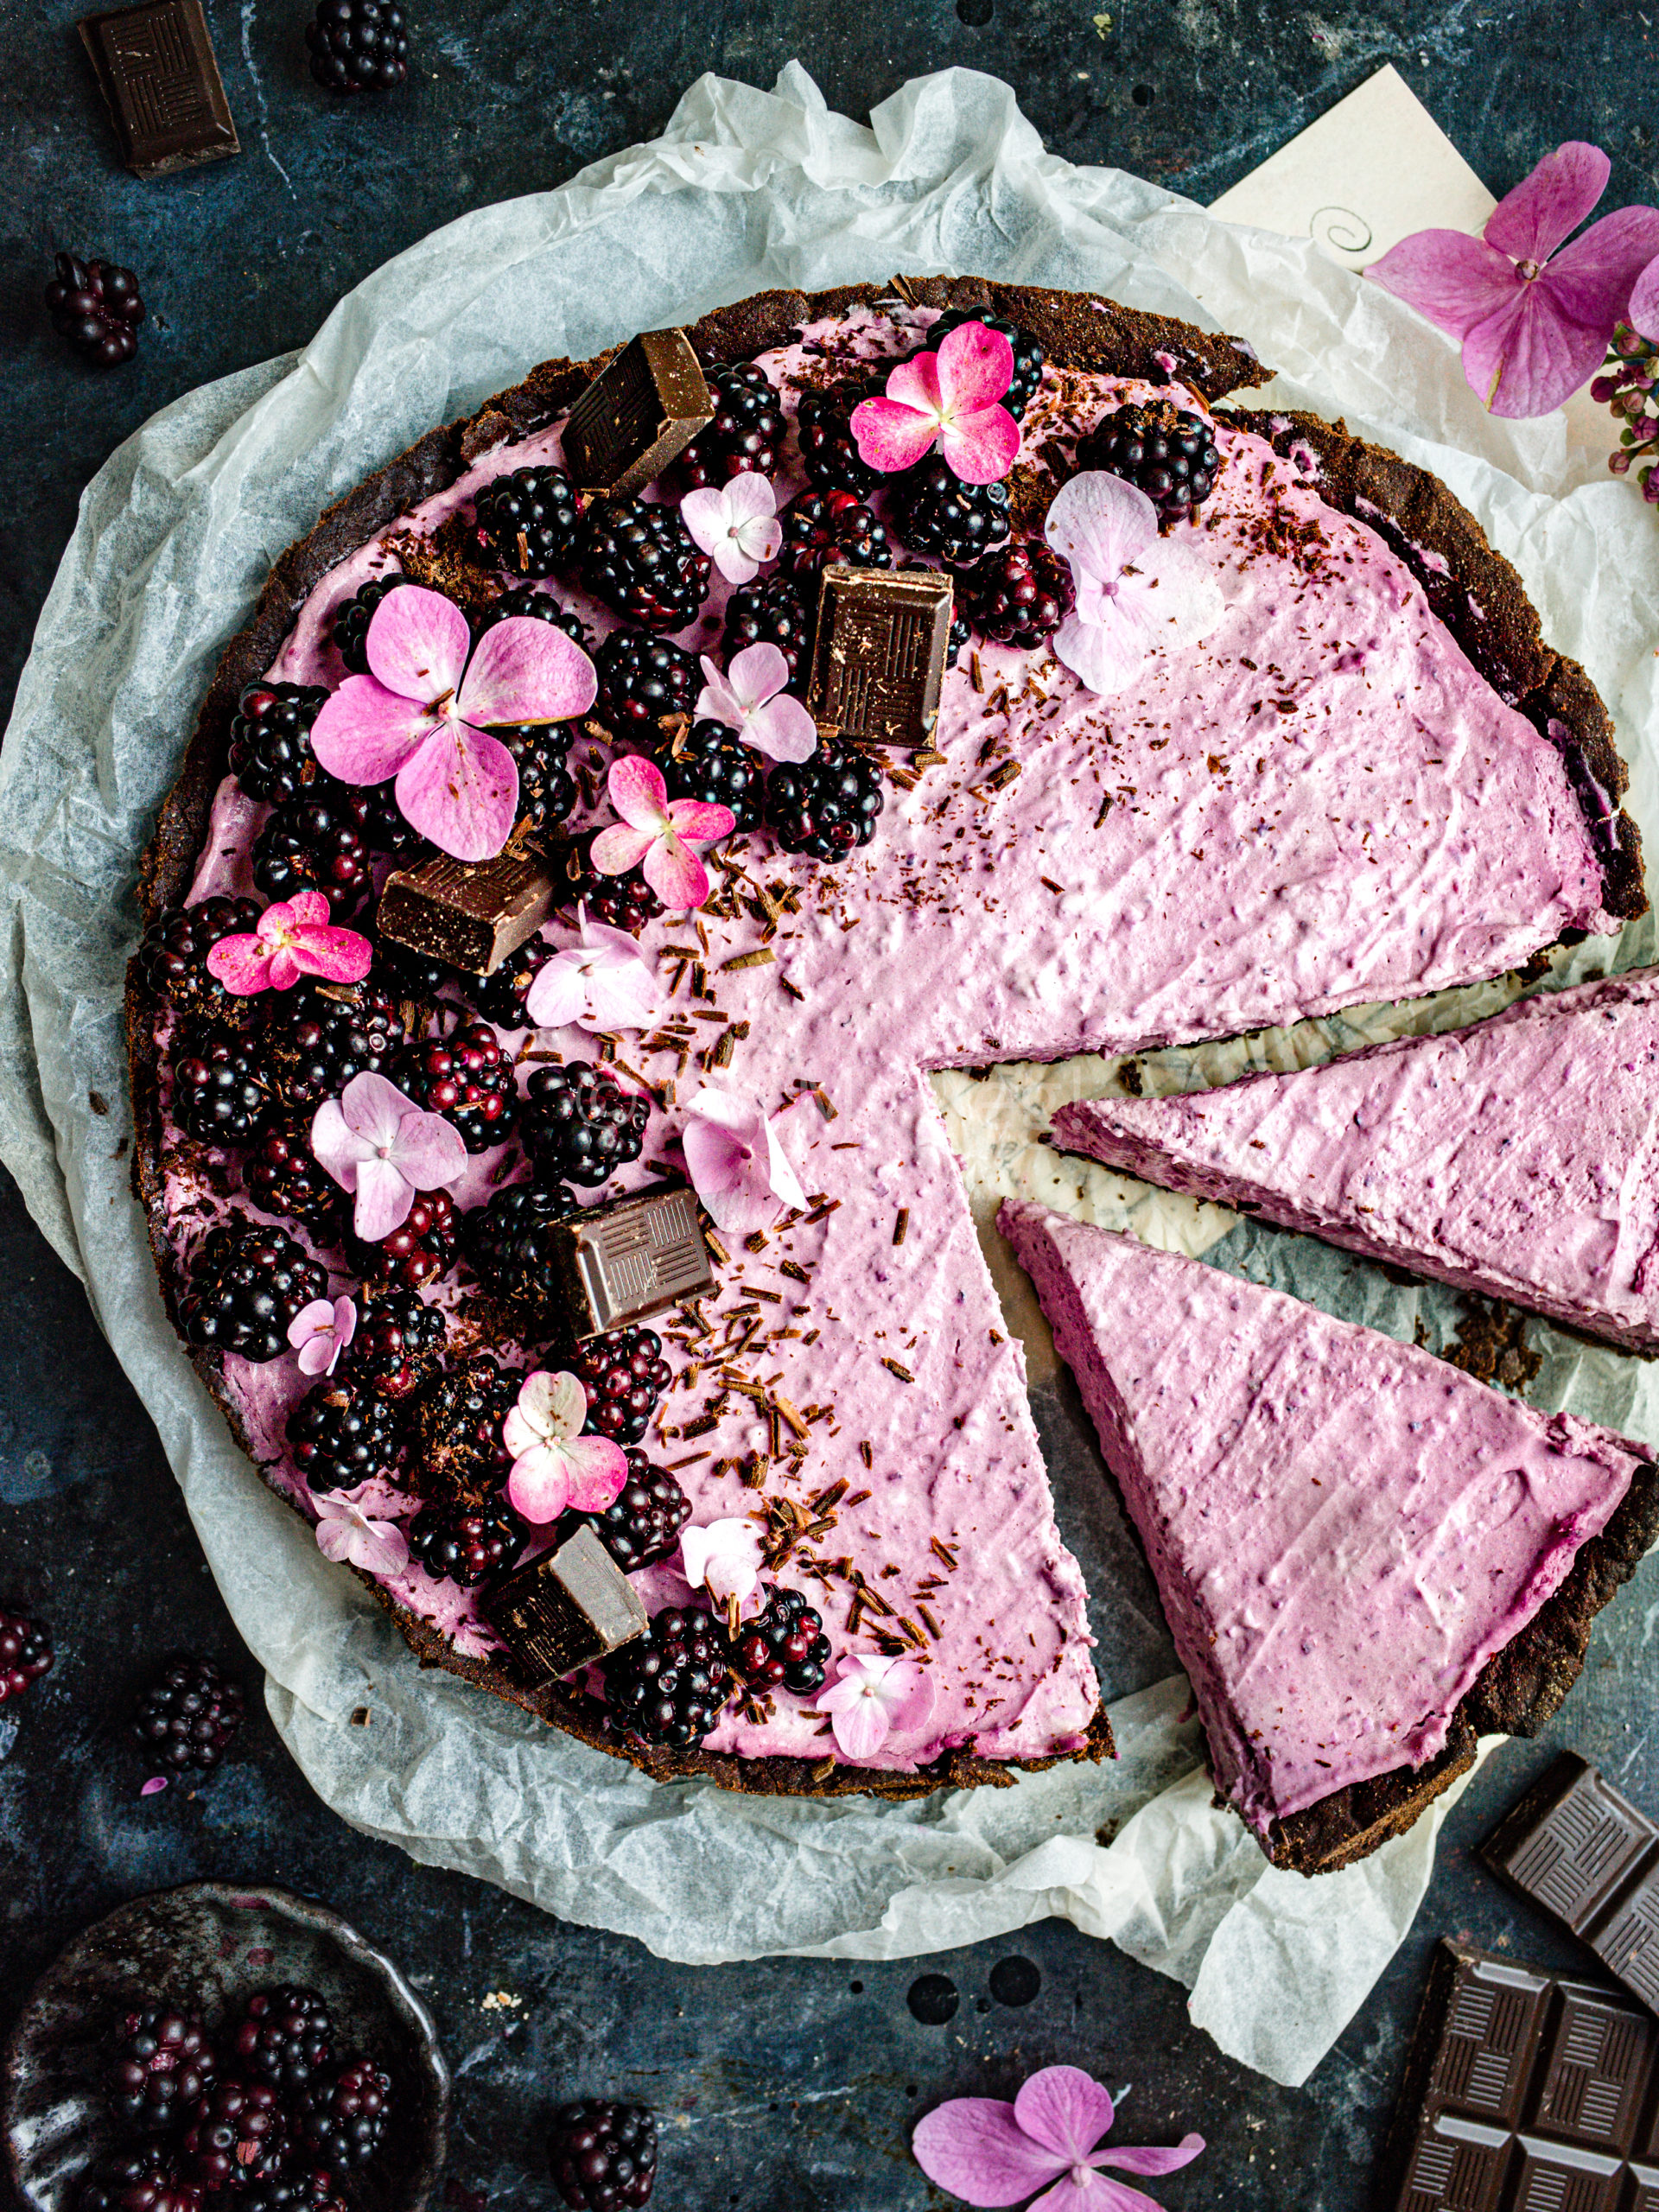 Blackberry tart with chocolate and flowers on a dark blue background. 